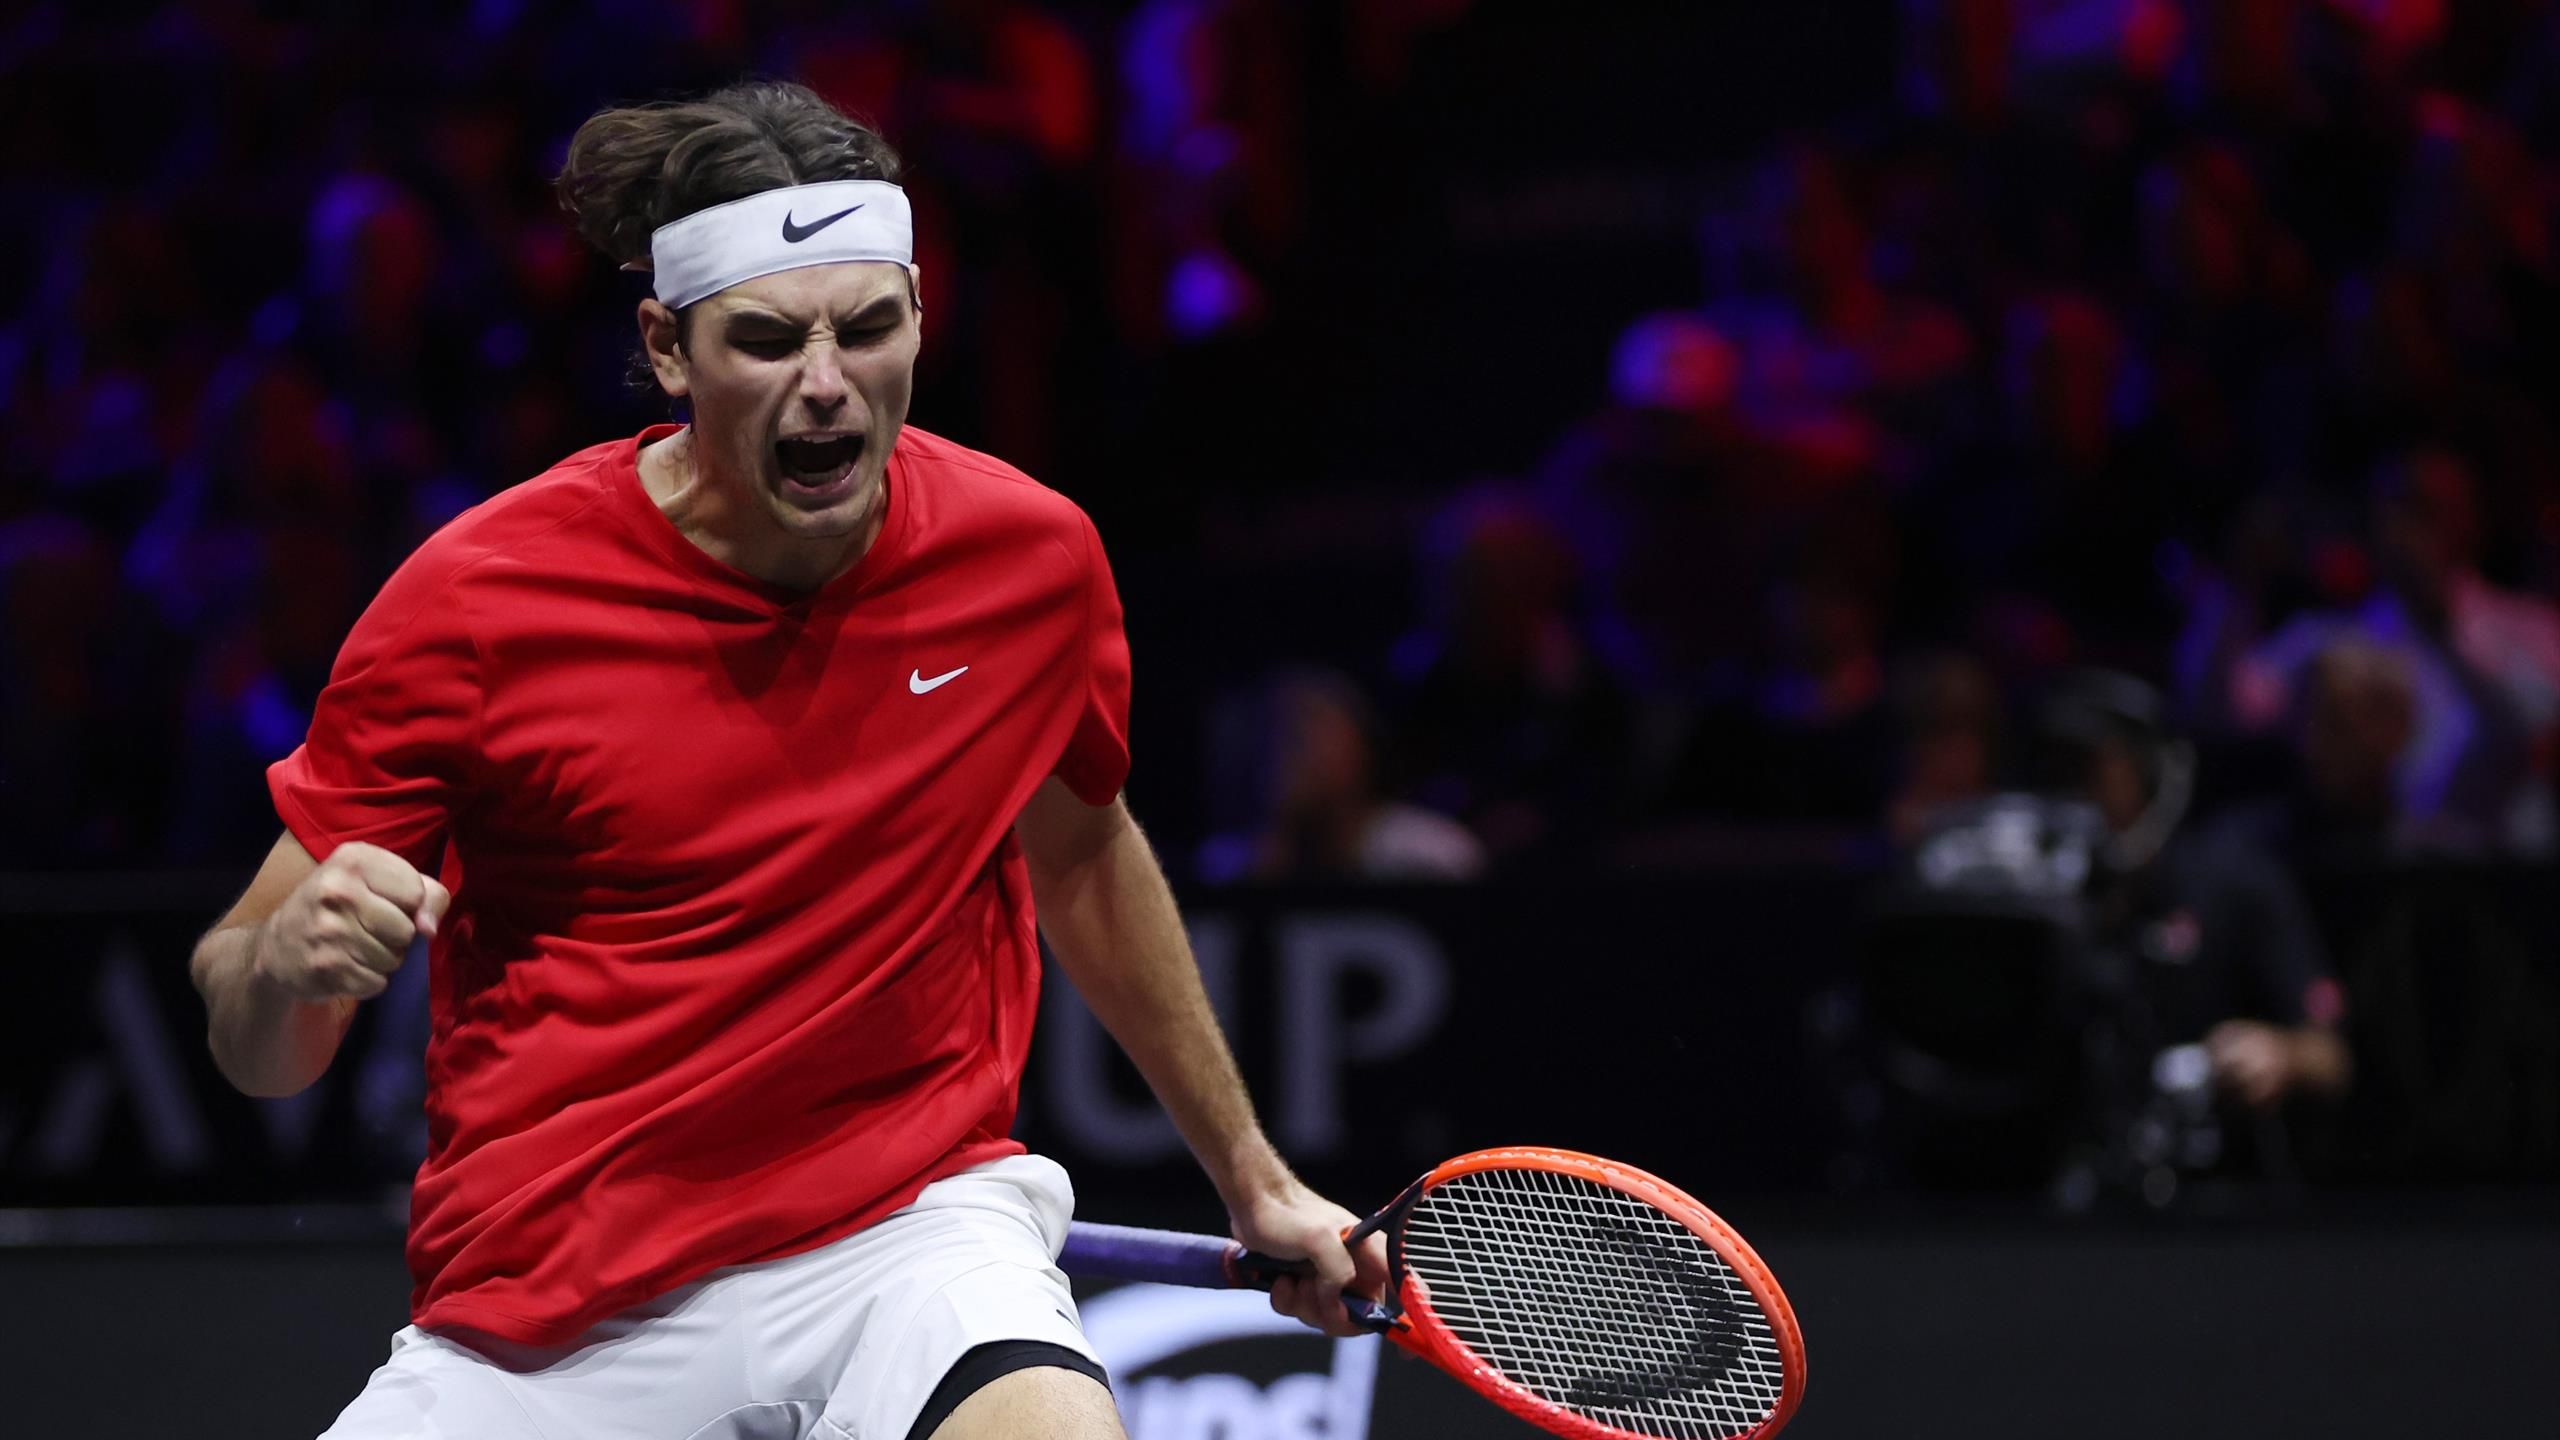 Laver Cup 2023 Team fever grips Team World as they close on dominant win over Team Europe